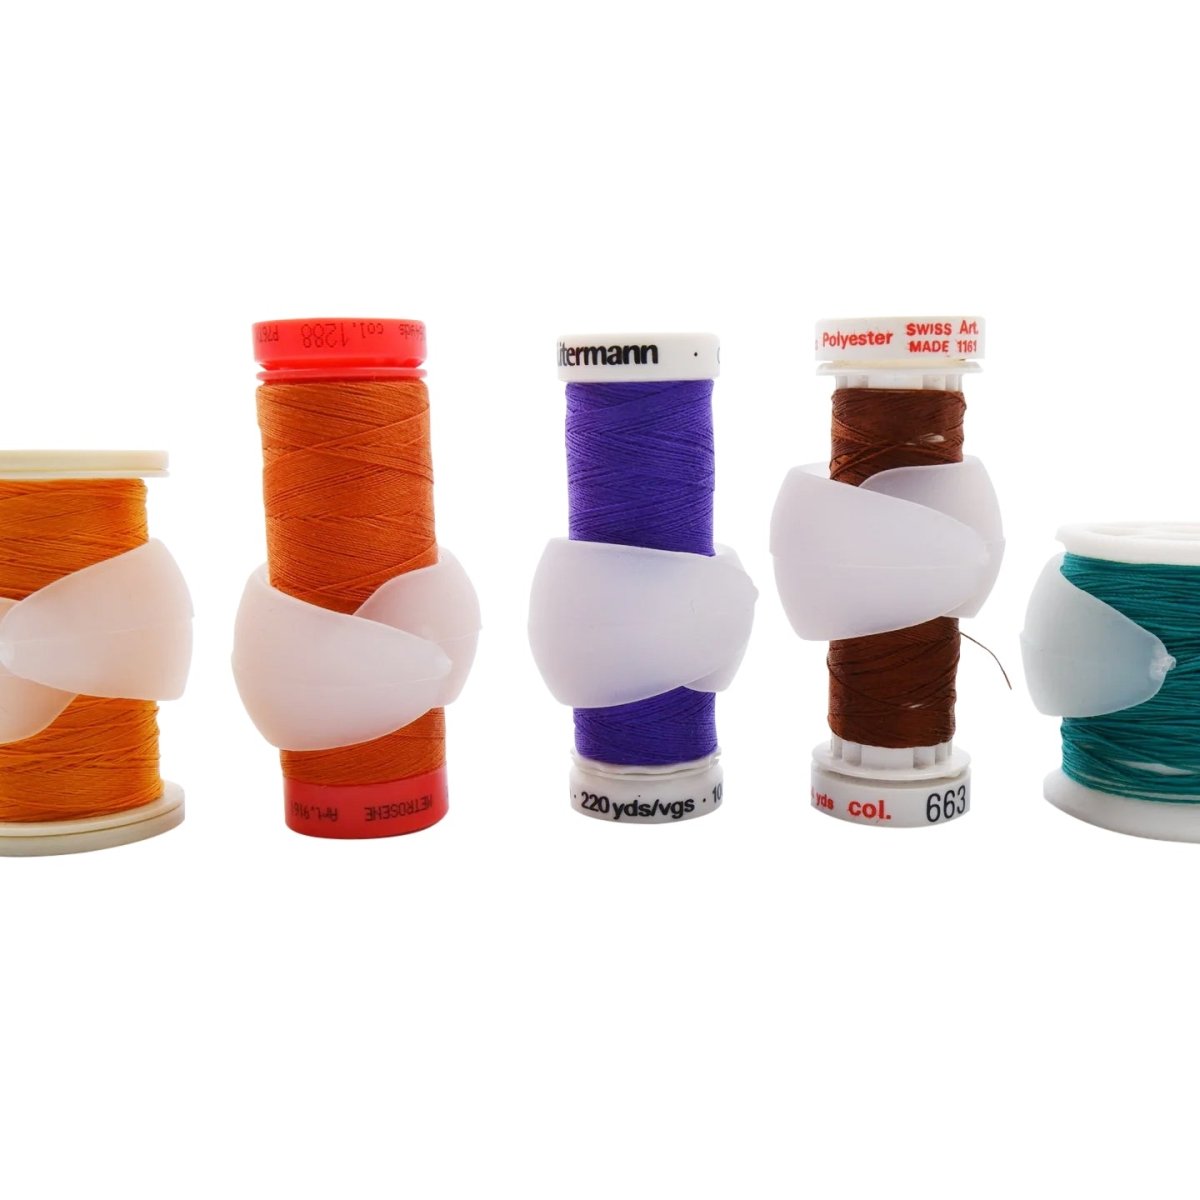 spool huggers around different types of sewing spools and cones